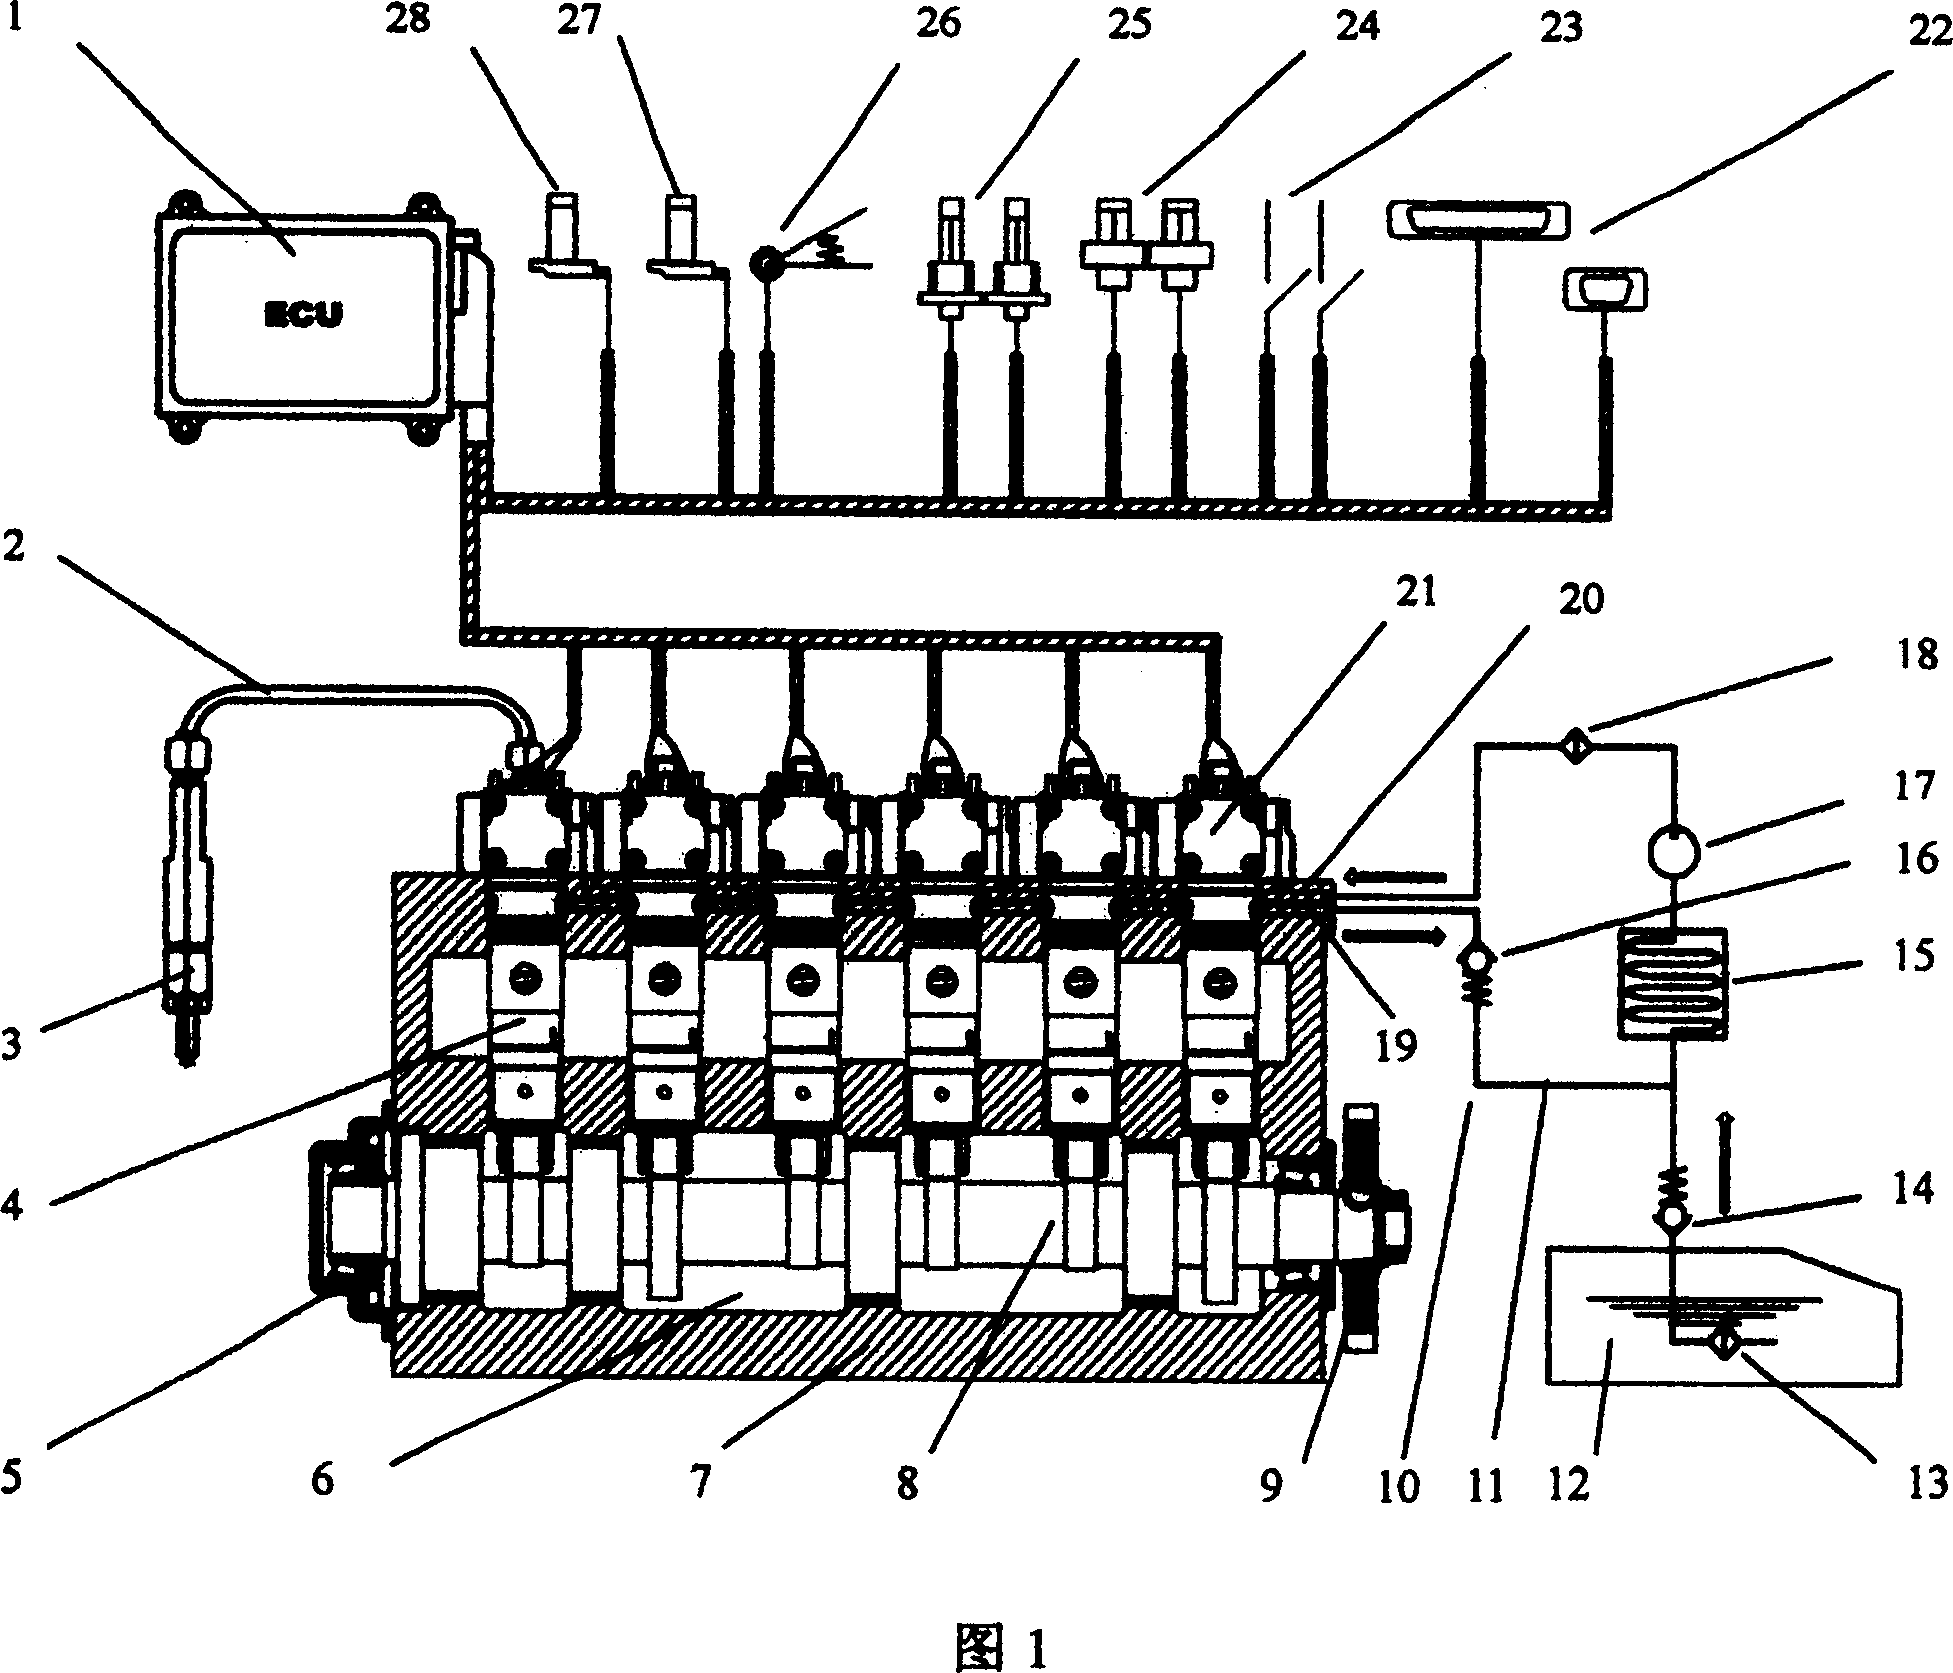 Electrical control upright arrangement integrated pump / valve - pipe - nozzle spraying system